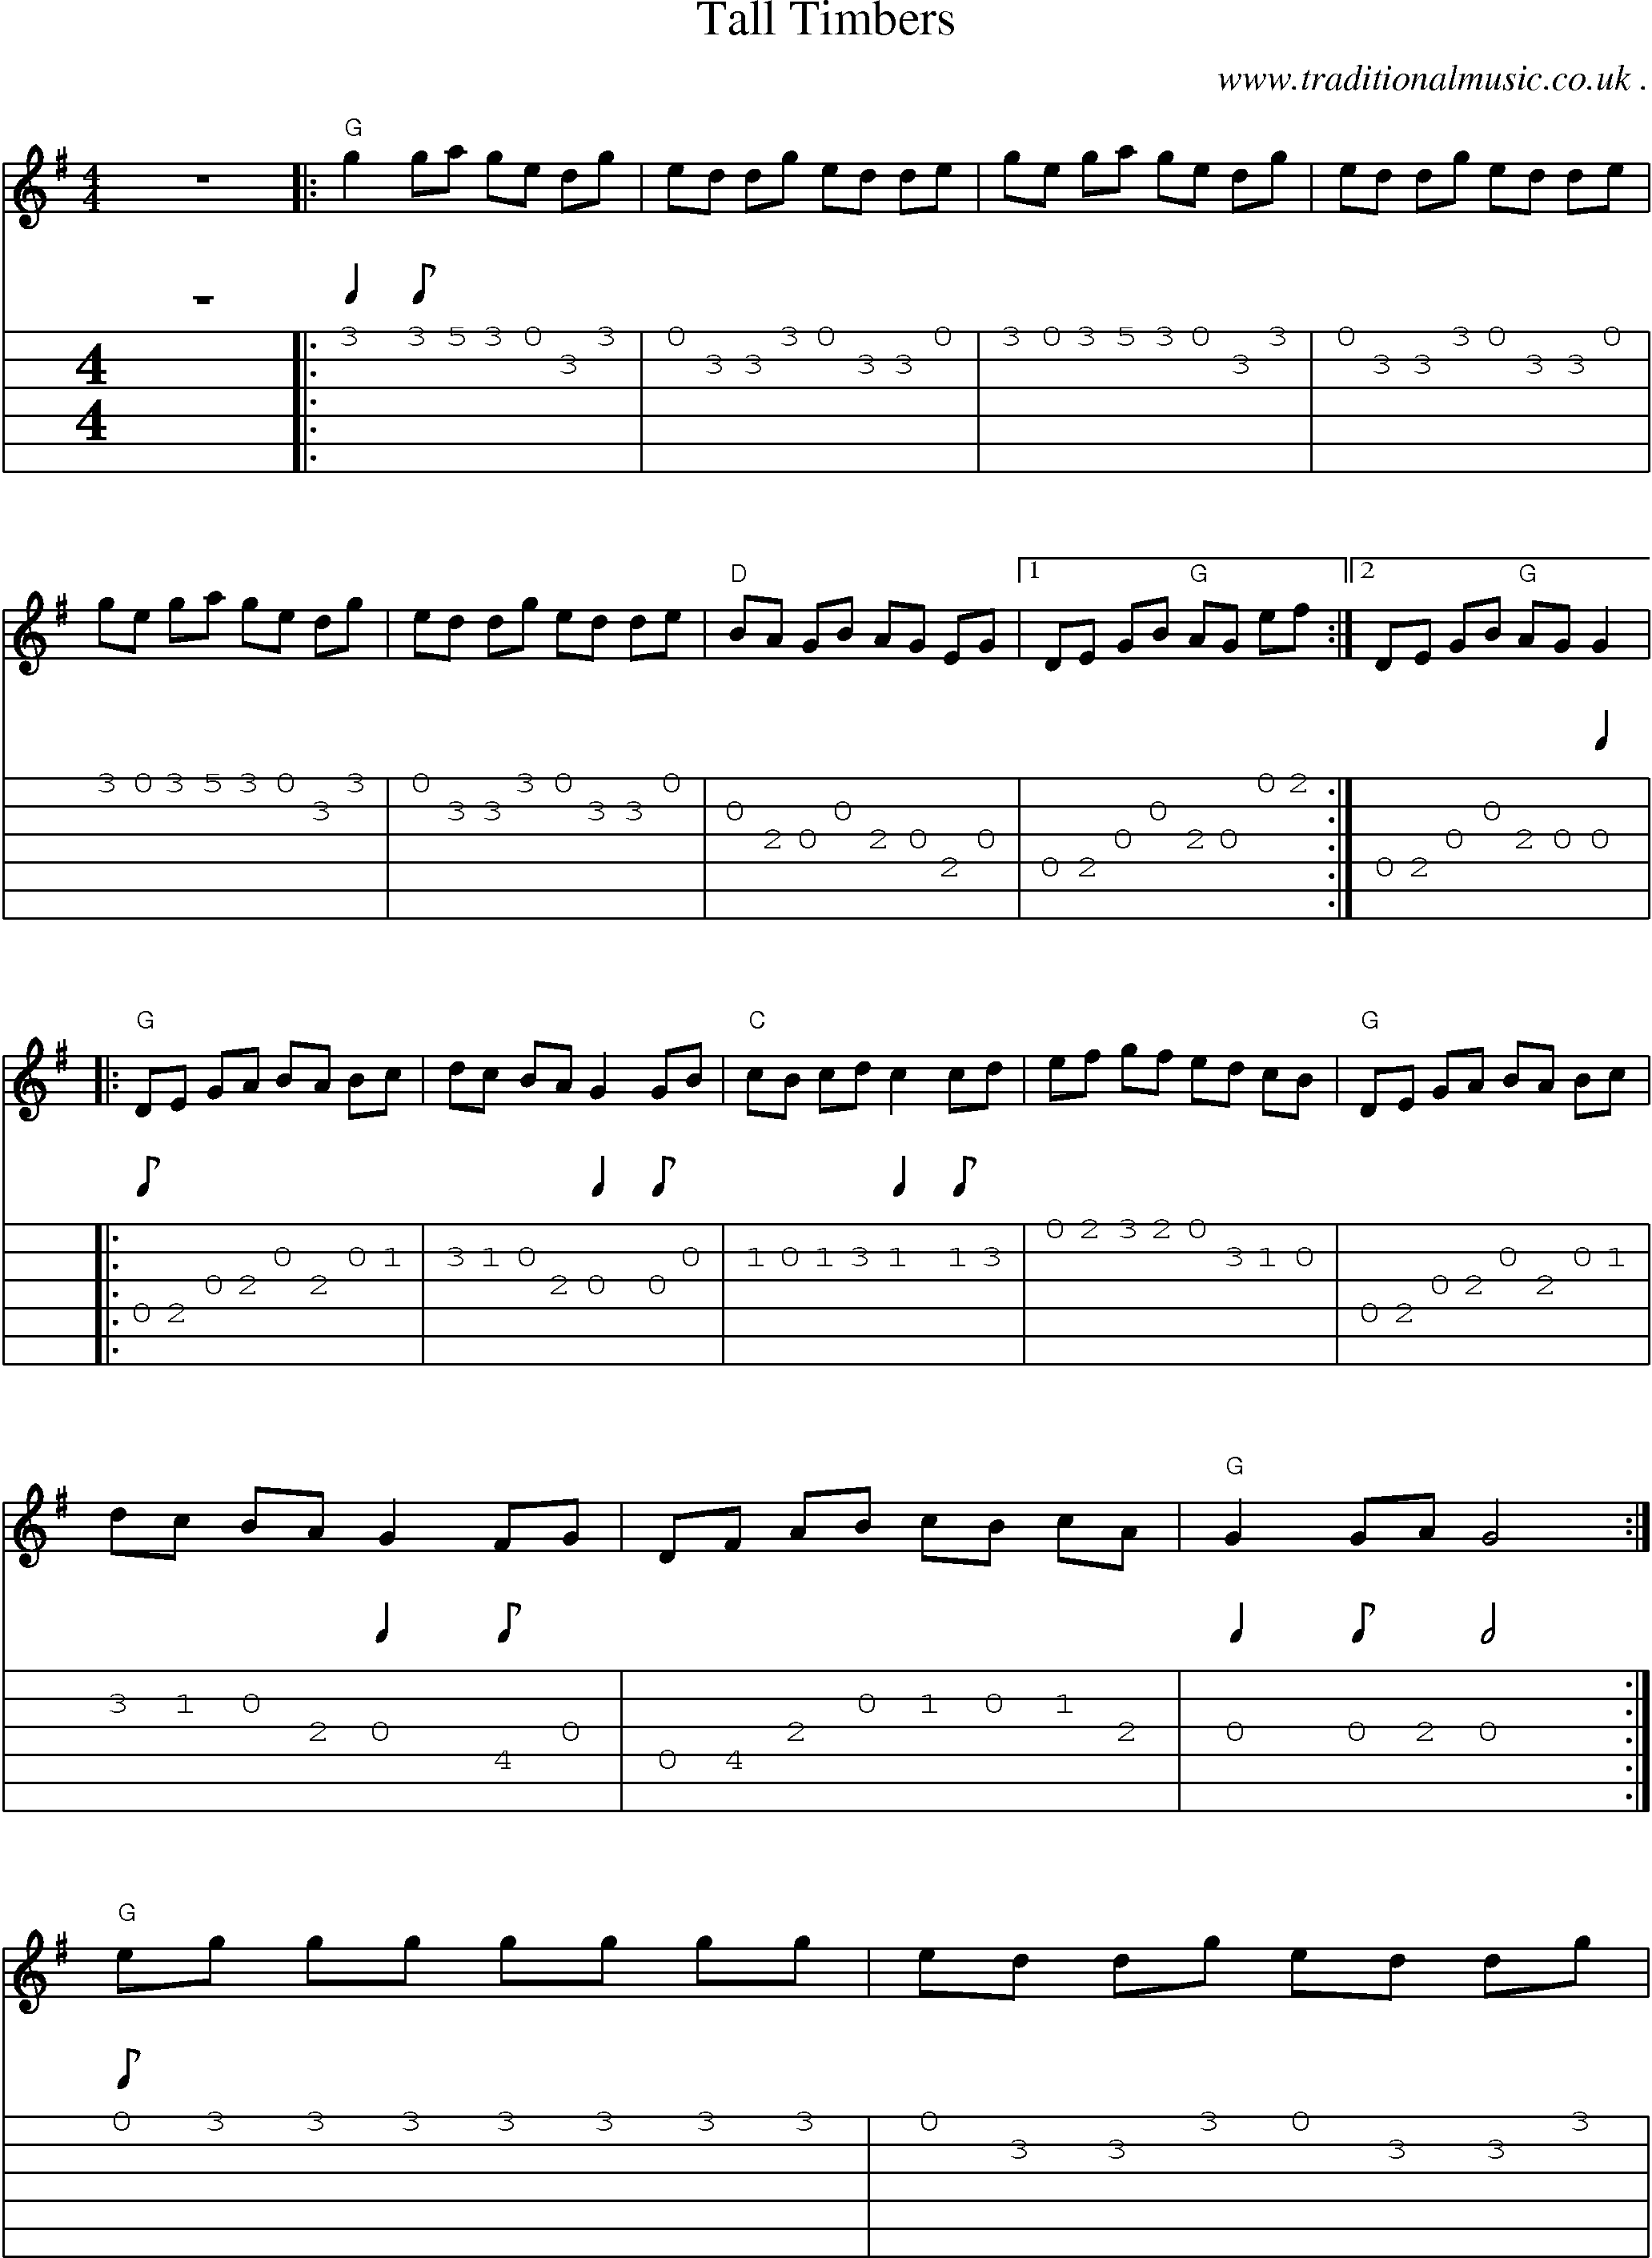 Music Score and Guitar Tabs for Tall Timbers